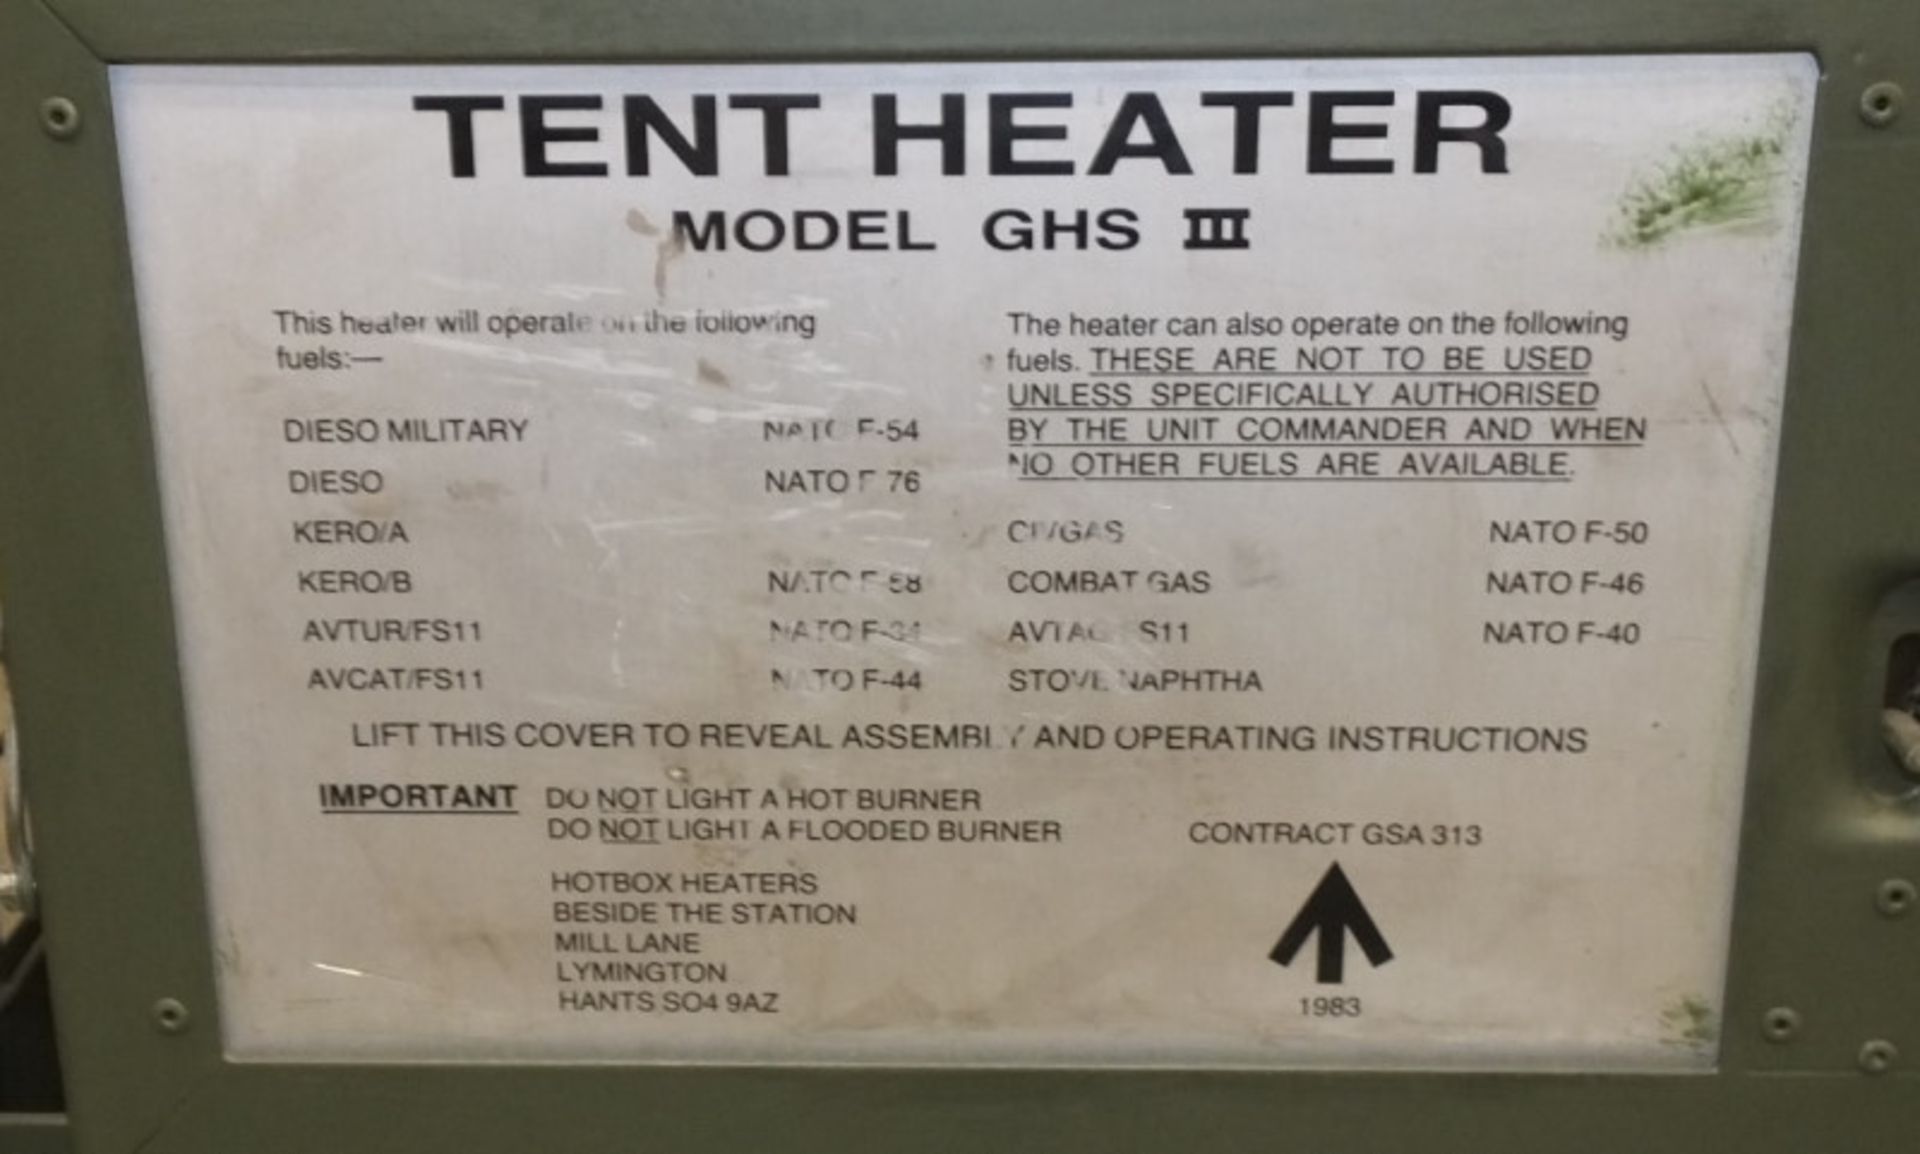 HotBox Heaters Tent Heater GHS III - NSN 4520-99-130-6045 Output - 5-15kW, Ex-MOD specific - Image 9 of 12